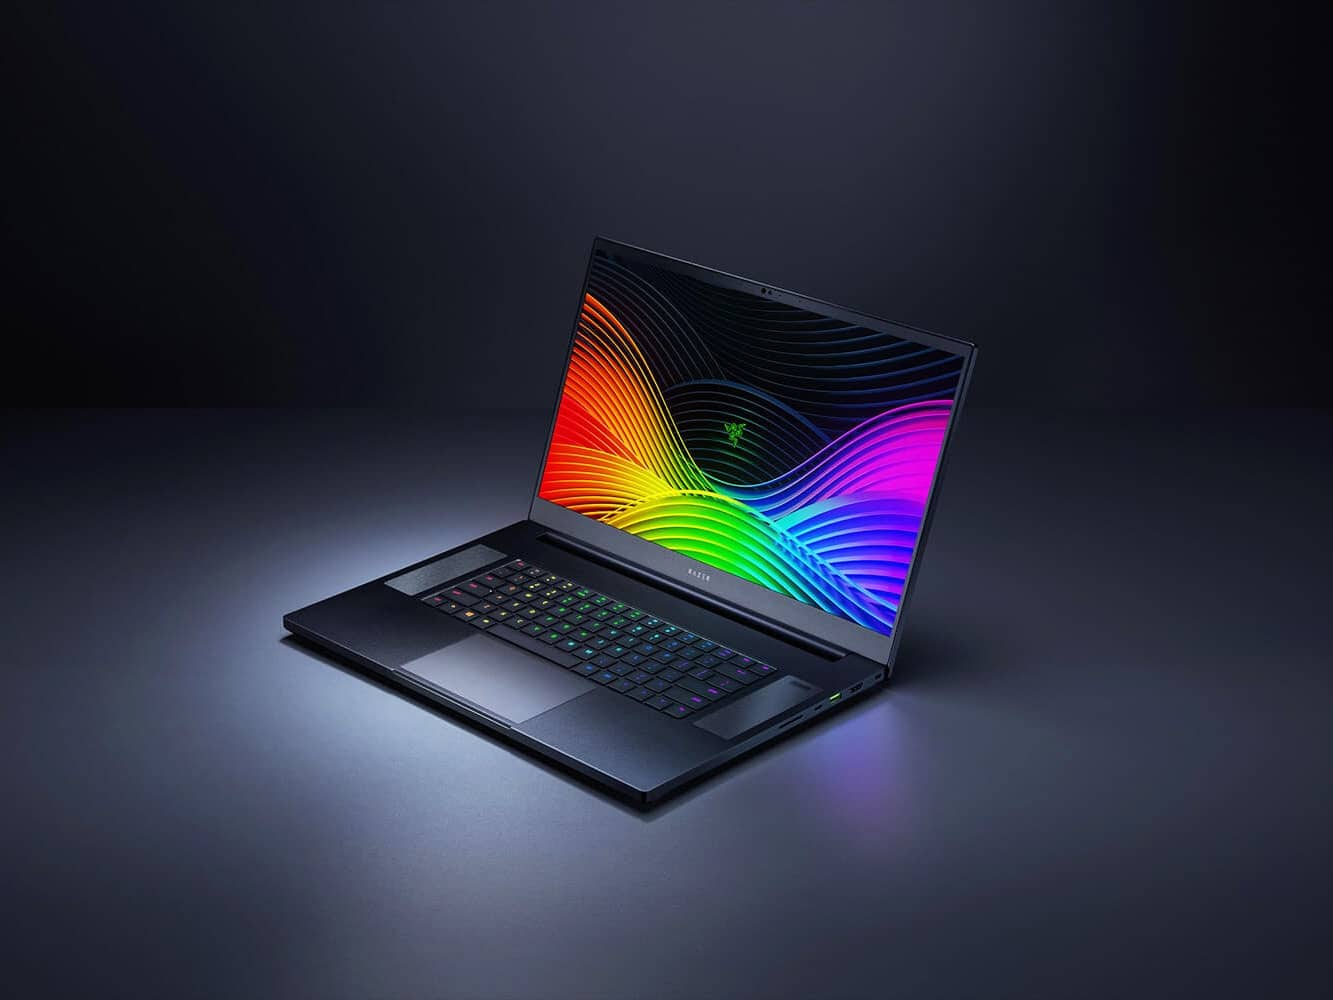 Razer will raise the price of its laptops due to a shortage of components